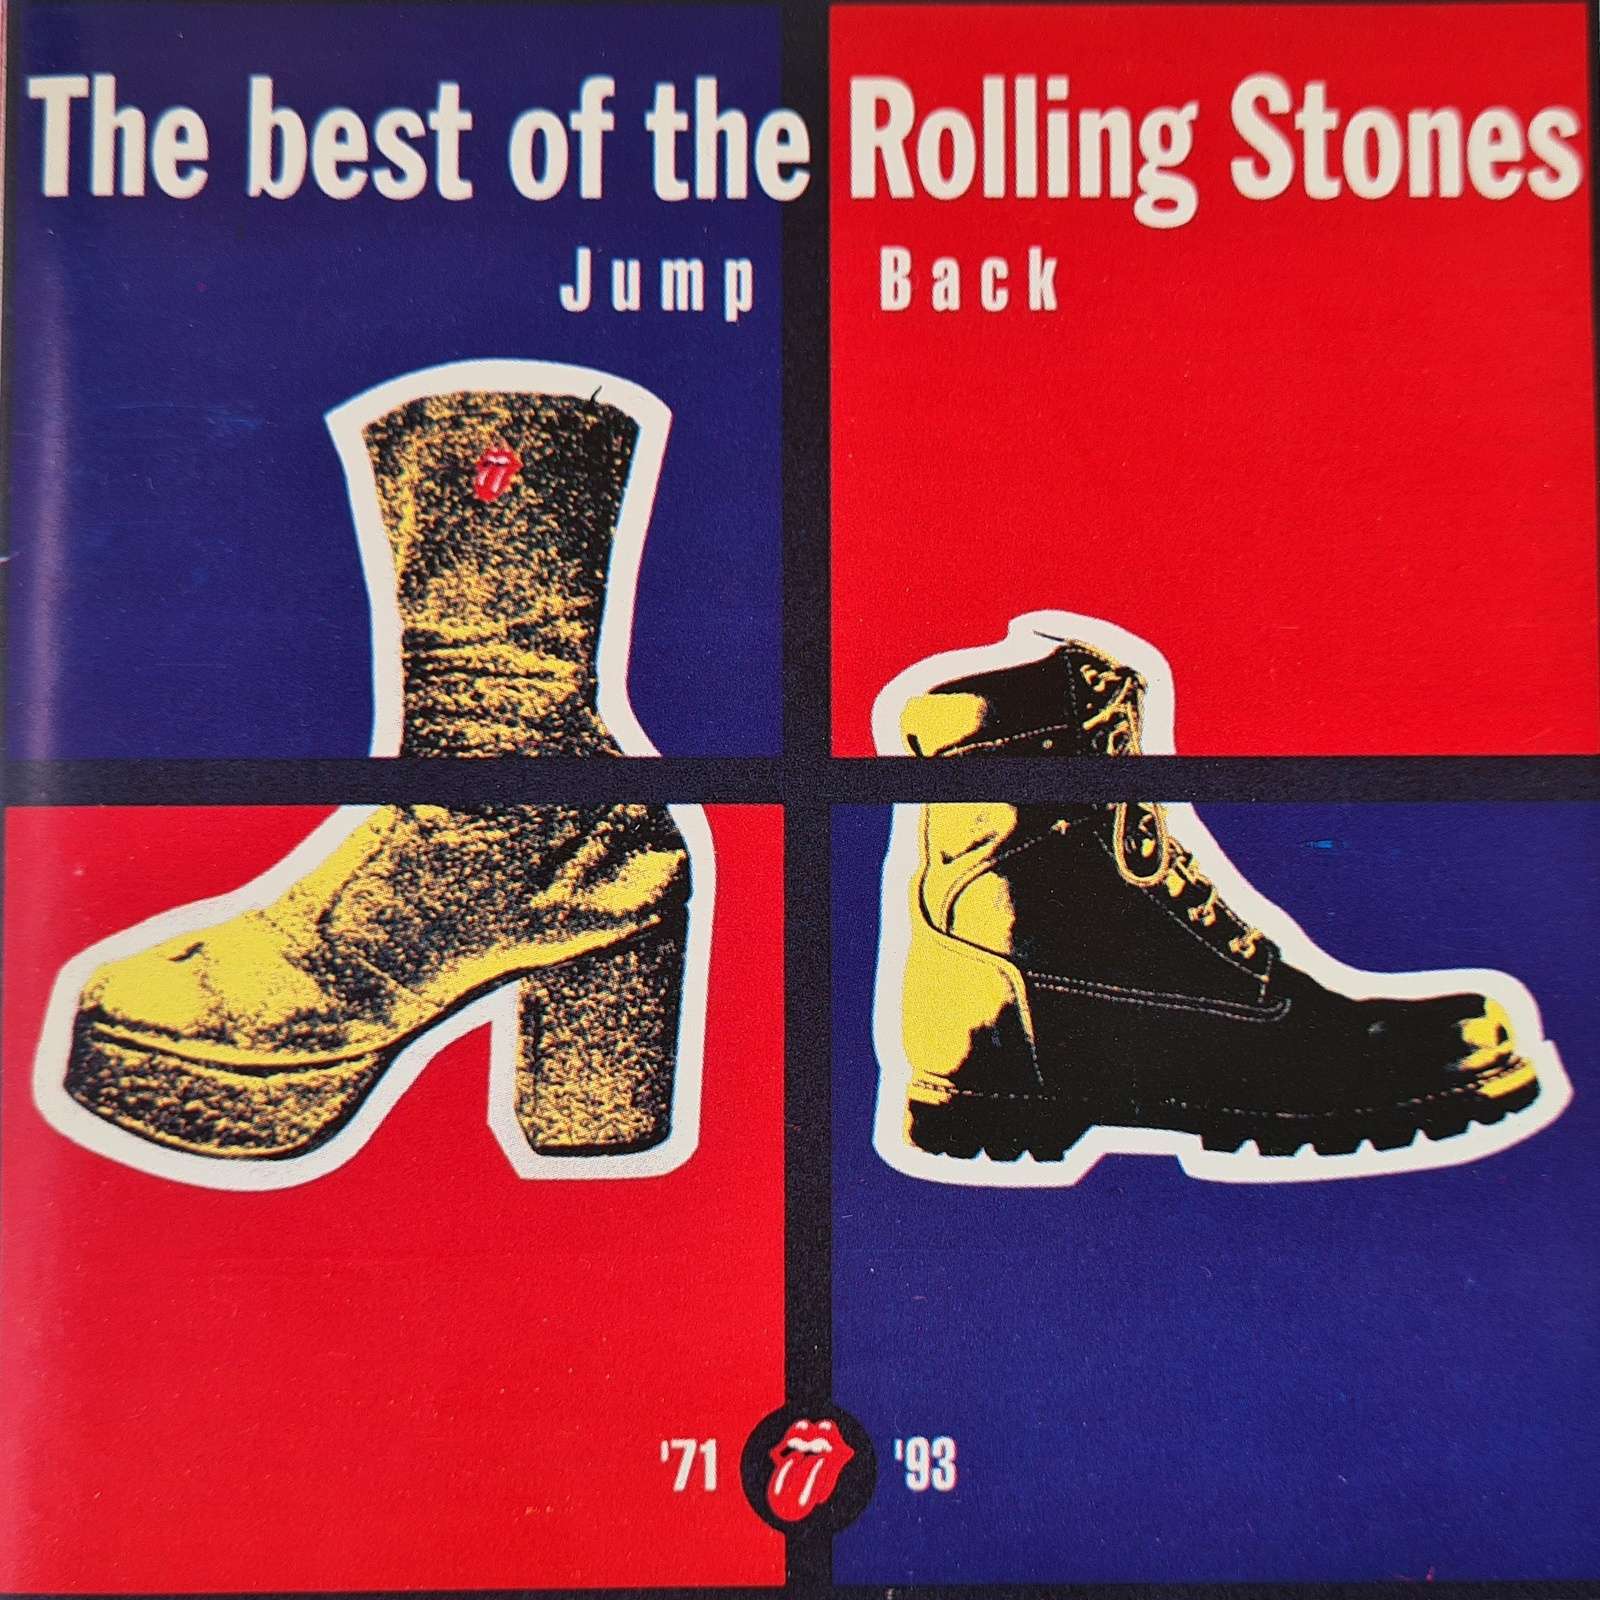 The Rolling Stones - The Best of the Rolling Stones - Jump Back (CD)